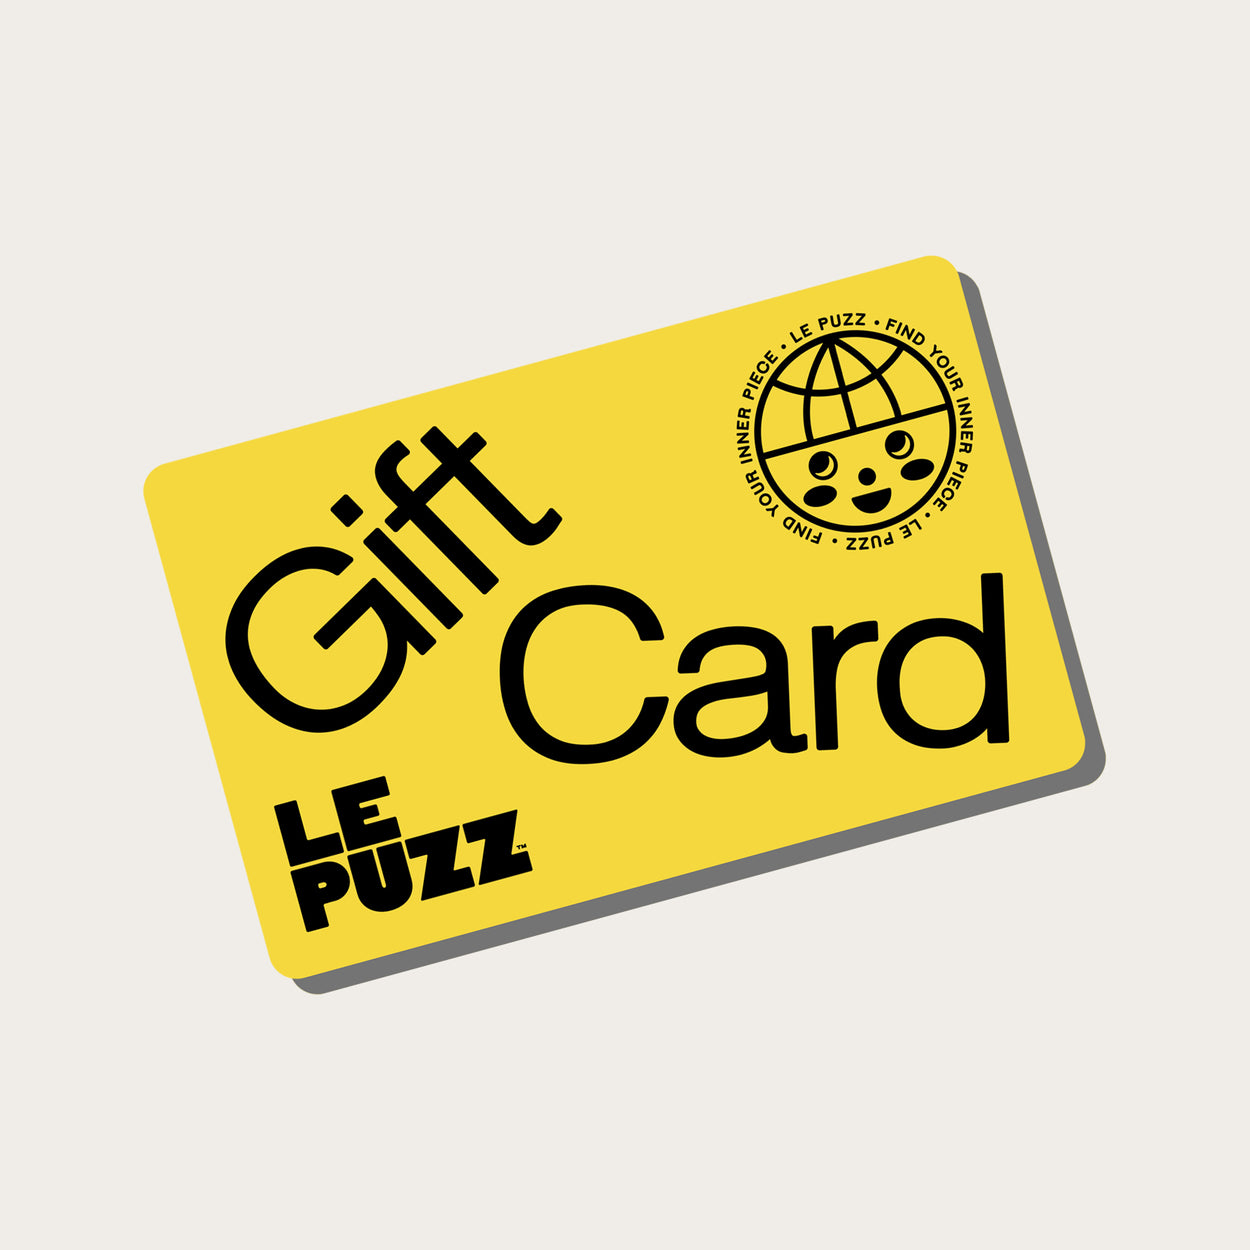 Le Puzz Gift Card